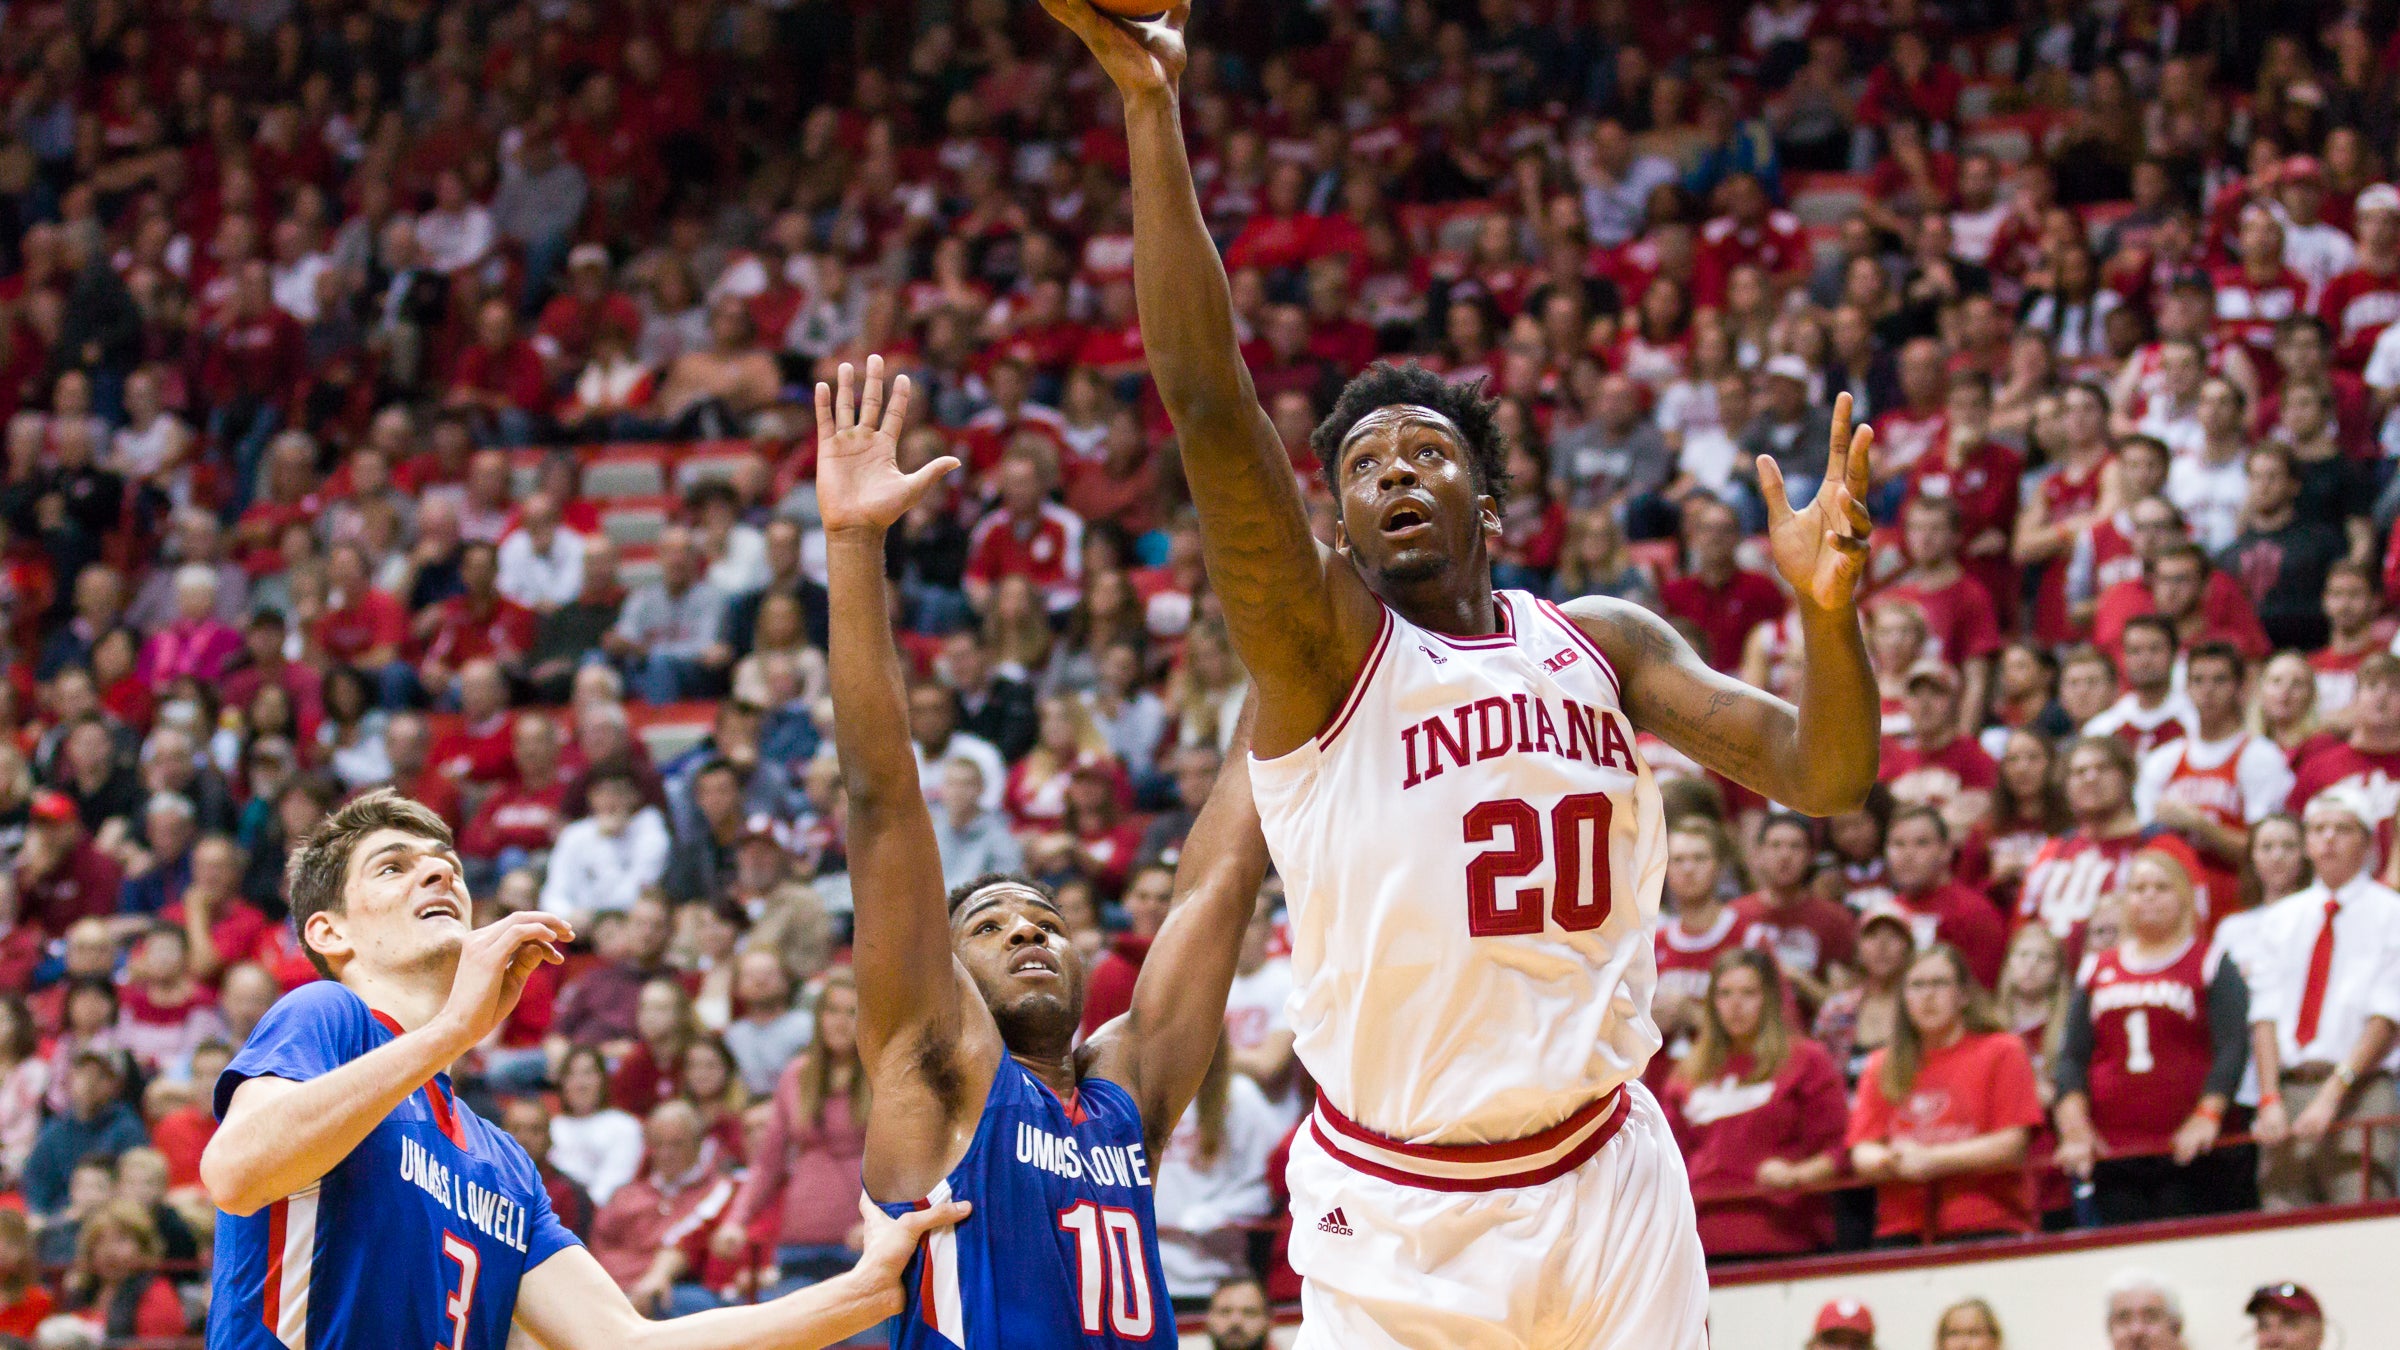 Hoosier Favorite No. 3? Picking Favorite Indiana Basketball Players, One  Number At a Time - Sports Illustrated Indiana Hoosiers News, Analysis and  More